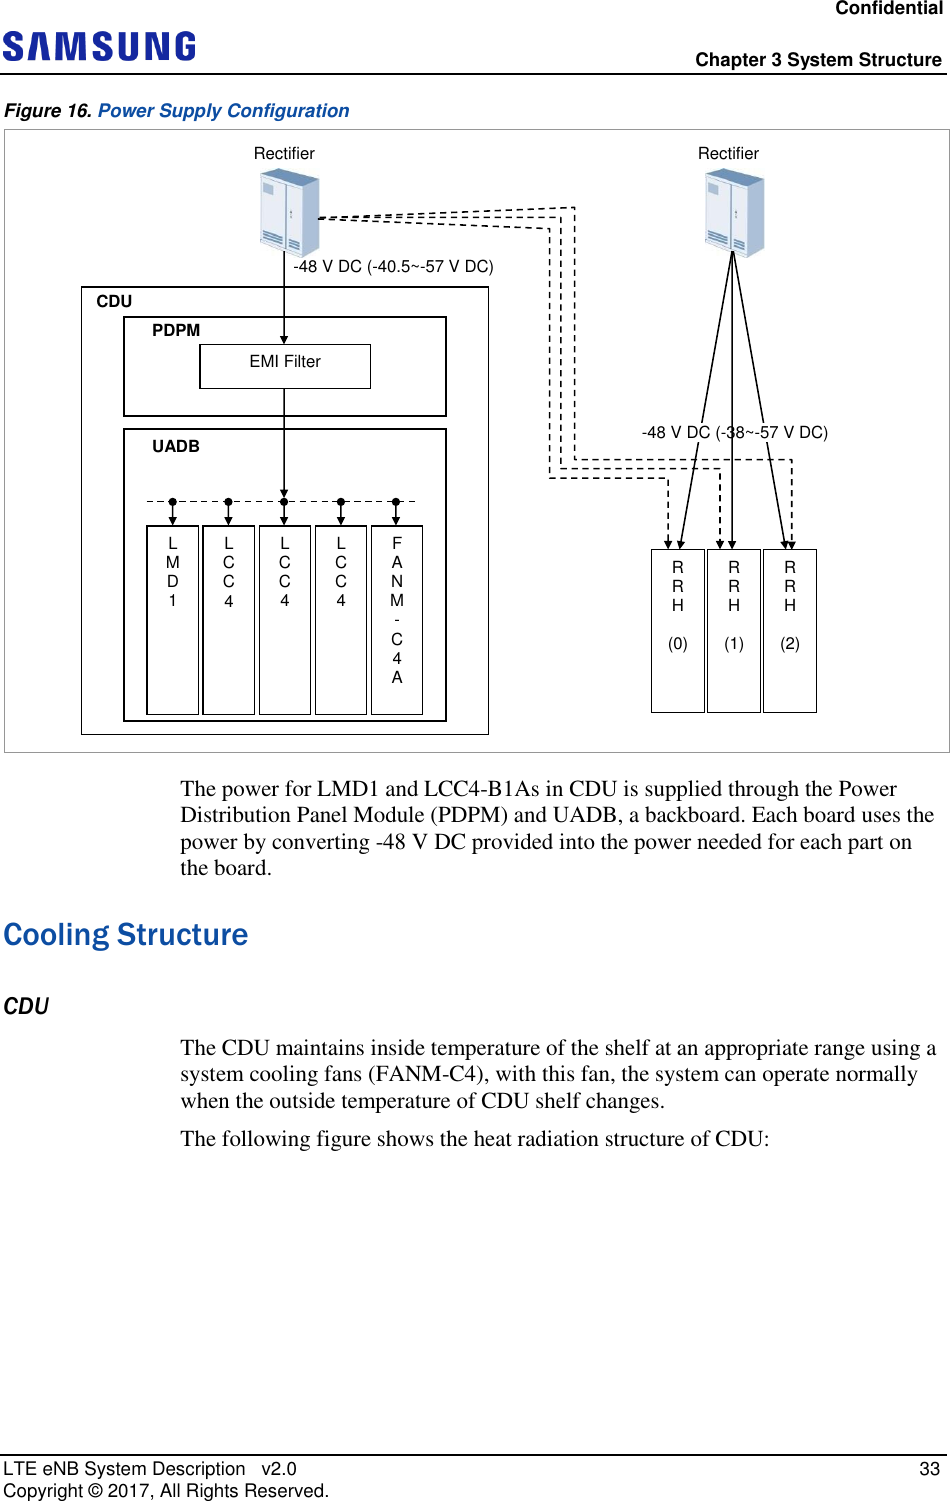 Confidential  Chapter 3 System Structure LTE eNB System Description   v2.0   33 Copyright ©  2017, All Rights Reserved. Figure 16. Power Supply Configuration  The power for LMD1 and LCC4-B1As in CDU is supplied through the Power Distribution Panel Module (PDPM) and UADB, a backboard. Each board uses the power by converting -48 V DC provided into the power needed for each part on the board. Cooling Structure CDU The CDU maintains inside temperature of the shelf at an appropriate range using a system cooling fans (FANM-C4), with this fan, the system can operate normally when the outside temperature of CDU shelf changes. The following figure shows the heat radiation structure of CDU: LMD1  LCC4 LCC4  LCC4  FANM -C4A CDU PDPM EMI Filter -48 V DC (-40.5~-57 V DC) Rectifier Rectifier R R H  (0) R R H  (1)  R R H  (2)  -48 V DC (-38~-57 V DC) UADB 